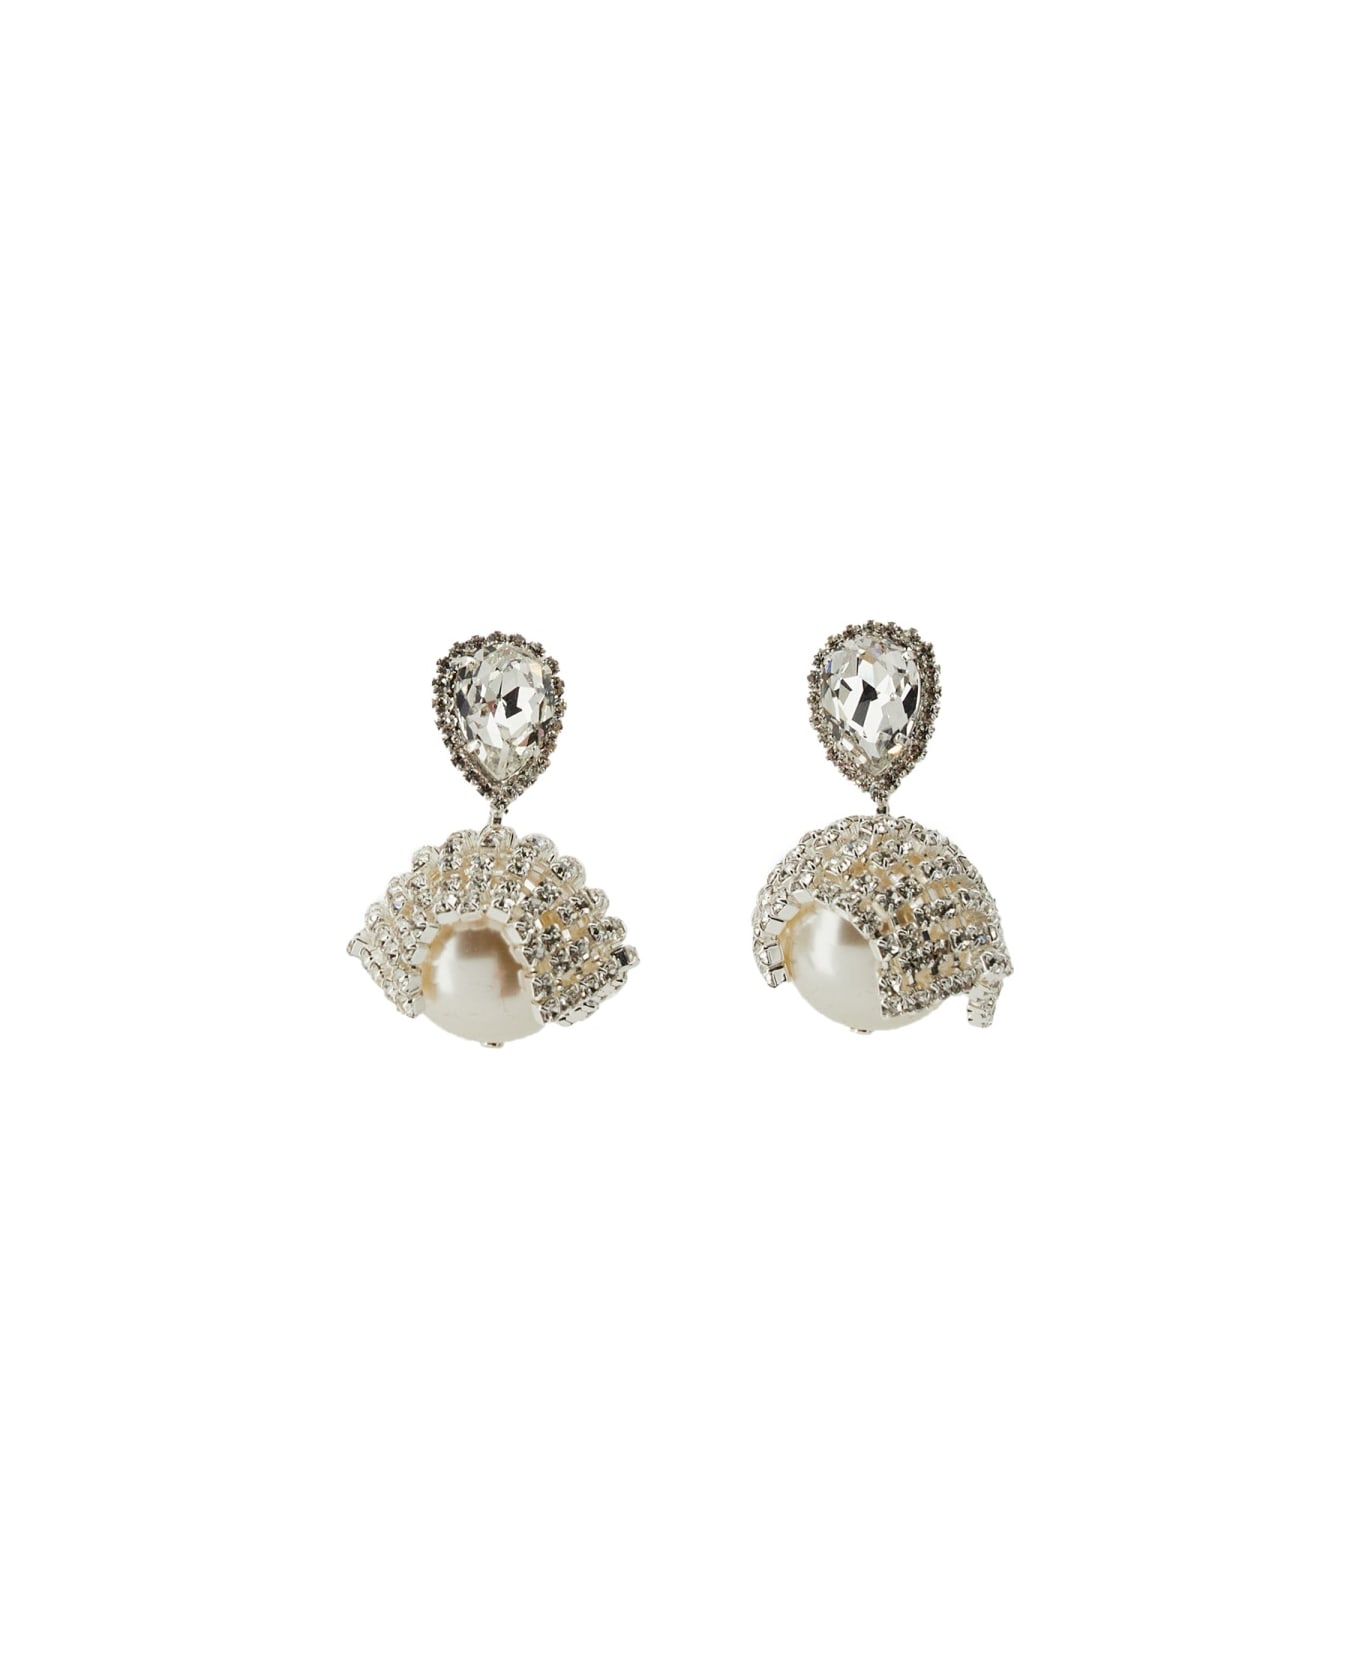 Magda Butrym Earrings With Pearls - SILVER